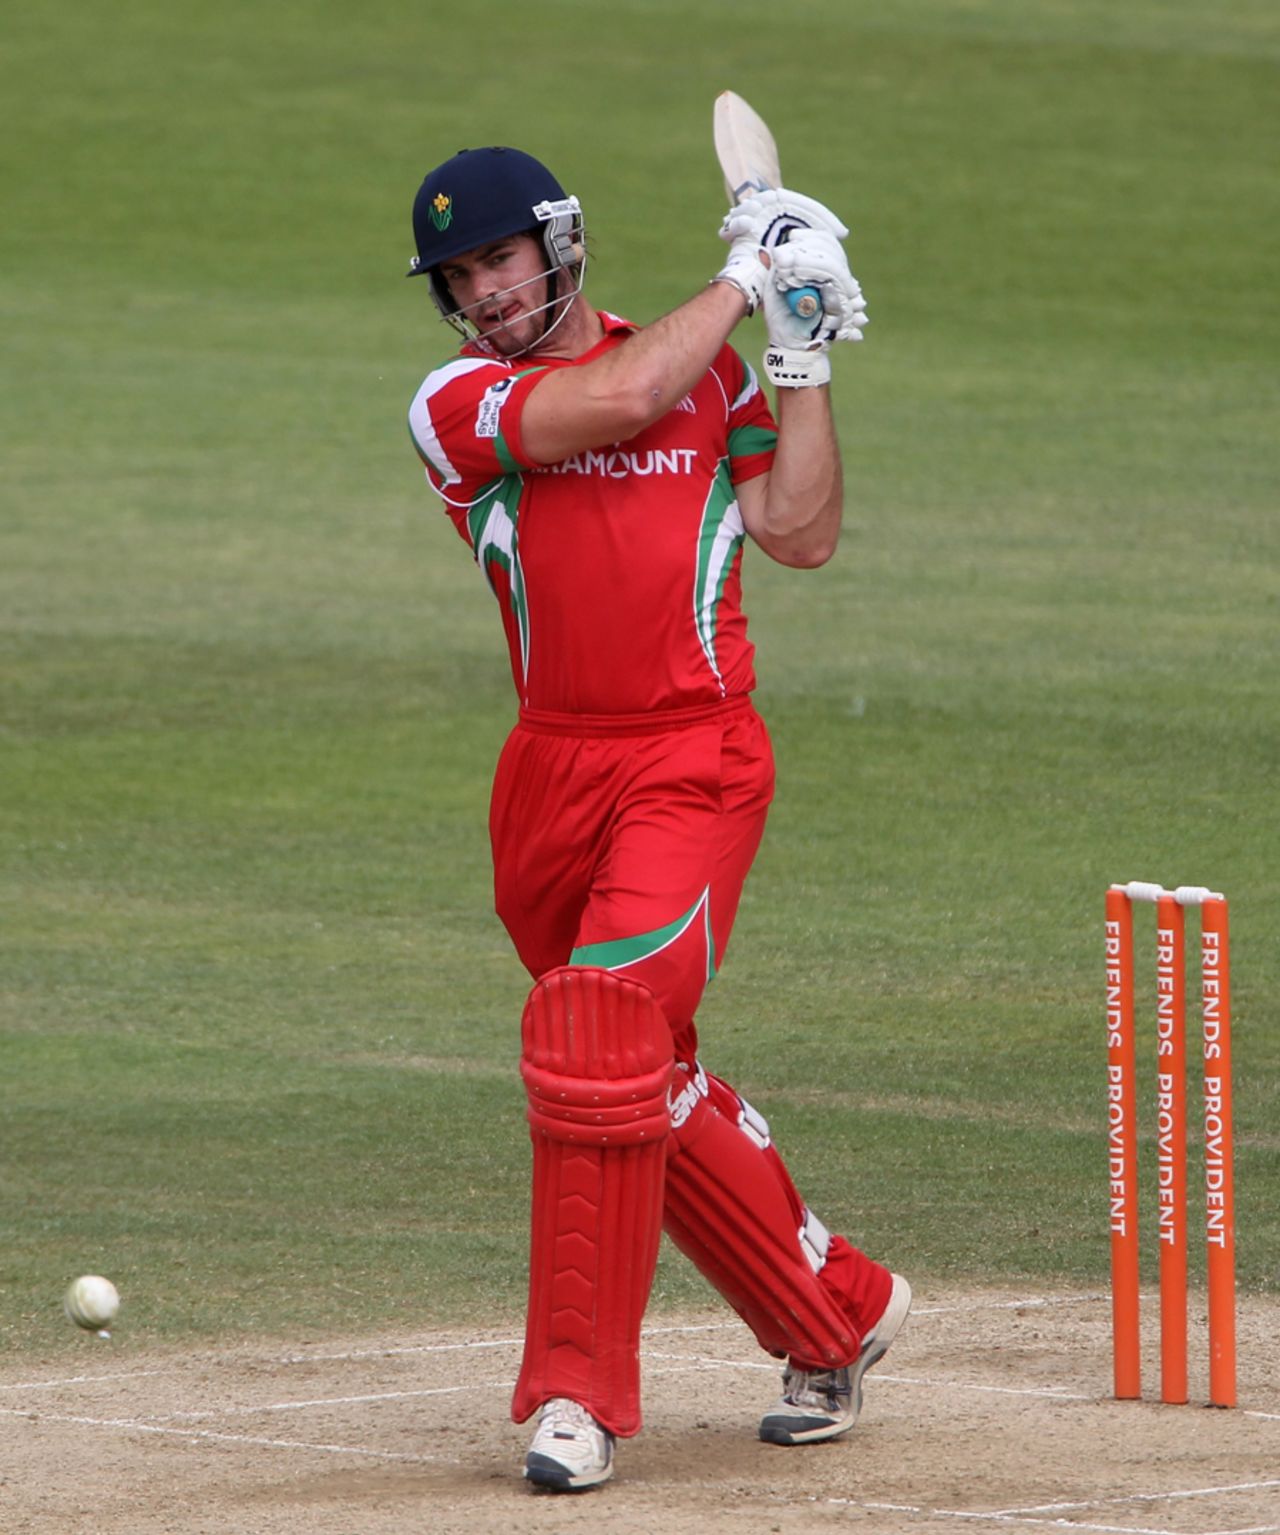 Tom Maynard guided Glamorgan's successful chase with an unbeaten 78, Surrey v Glamorgan, Friends Provident t20, The Oval, July 4, 2010